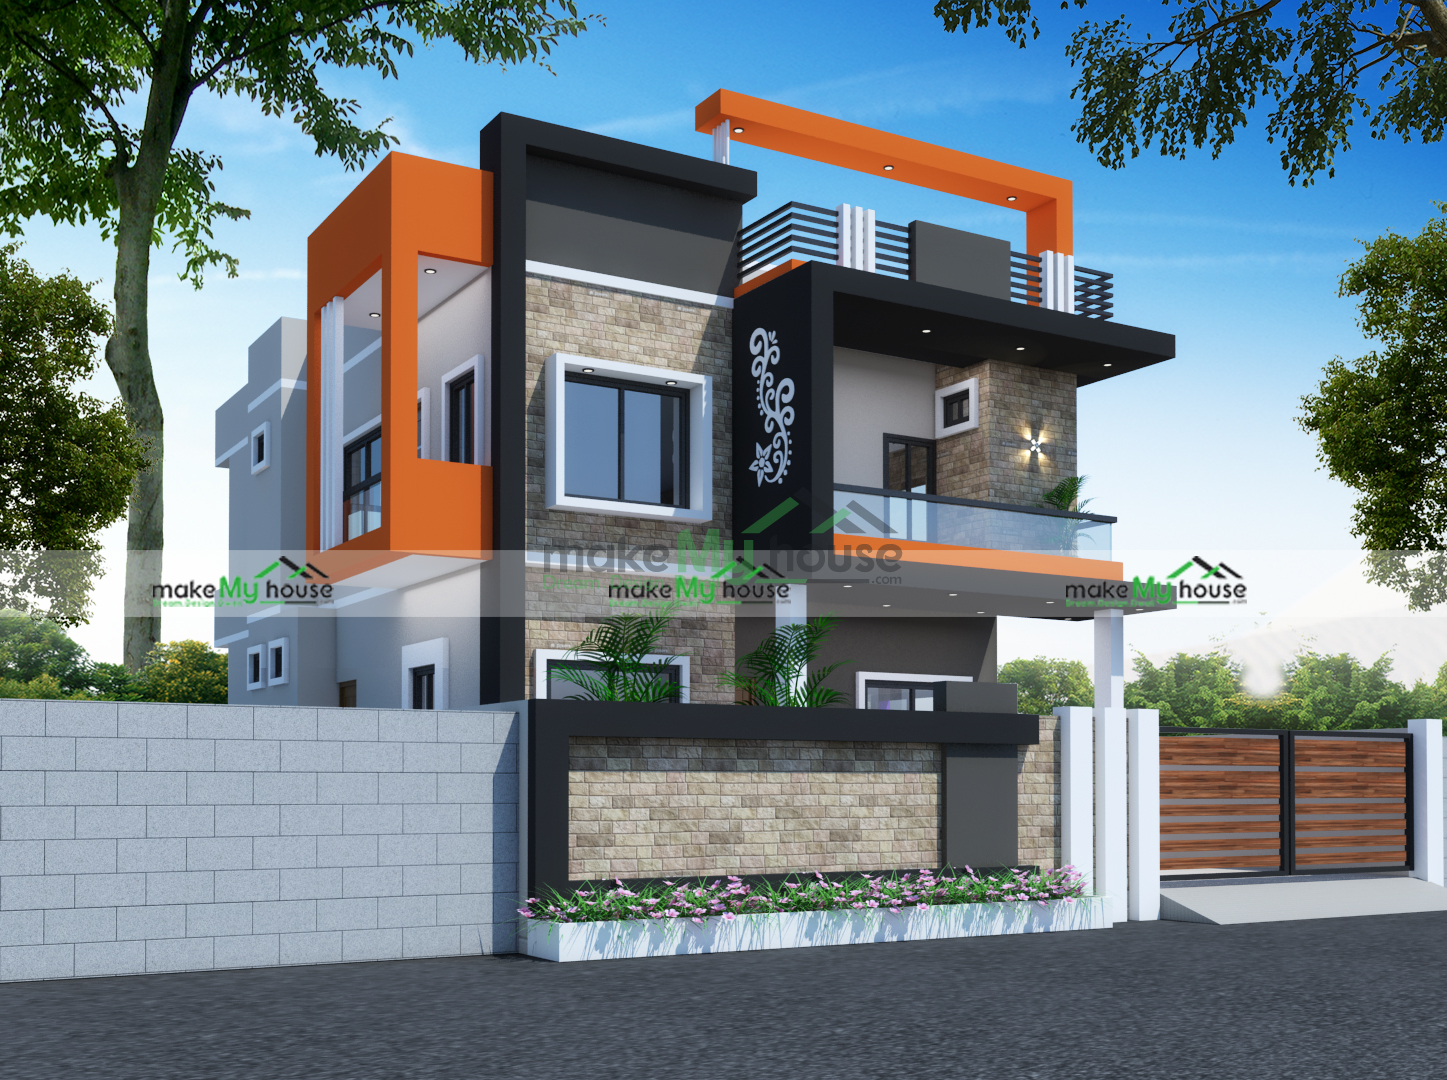 How can I get sample 5 BHK indian type house plans?